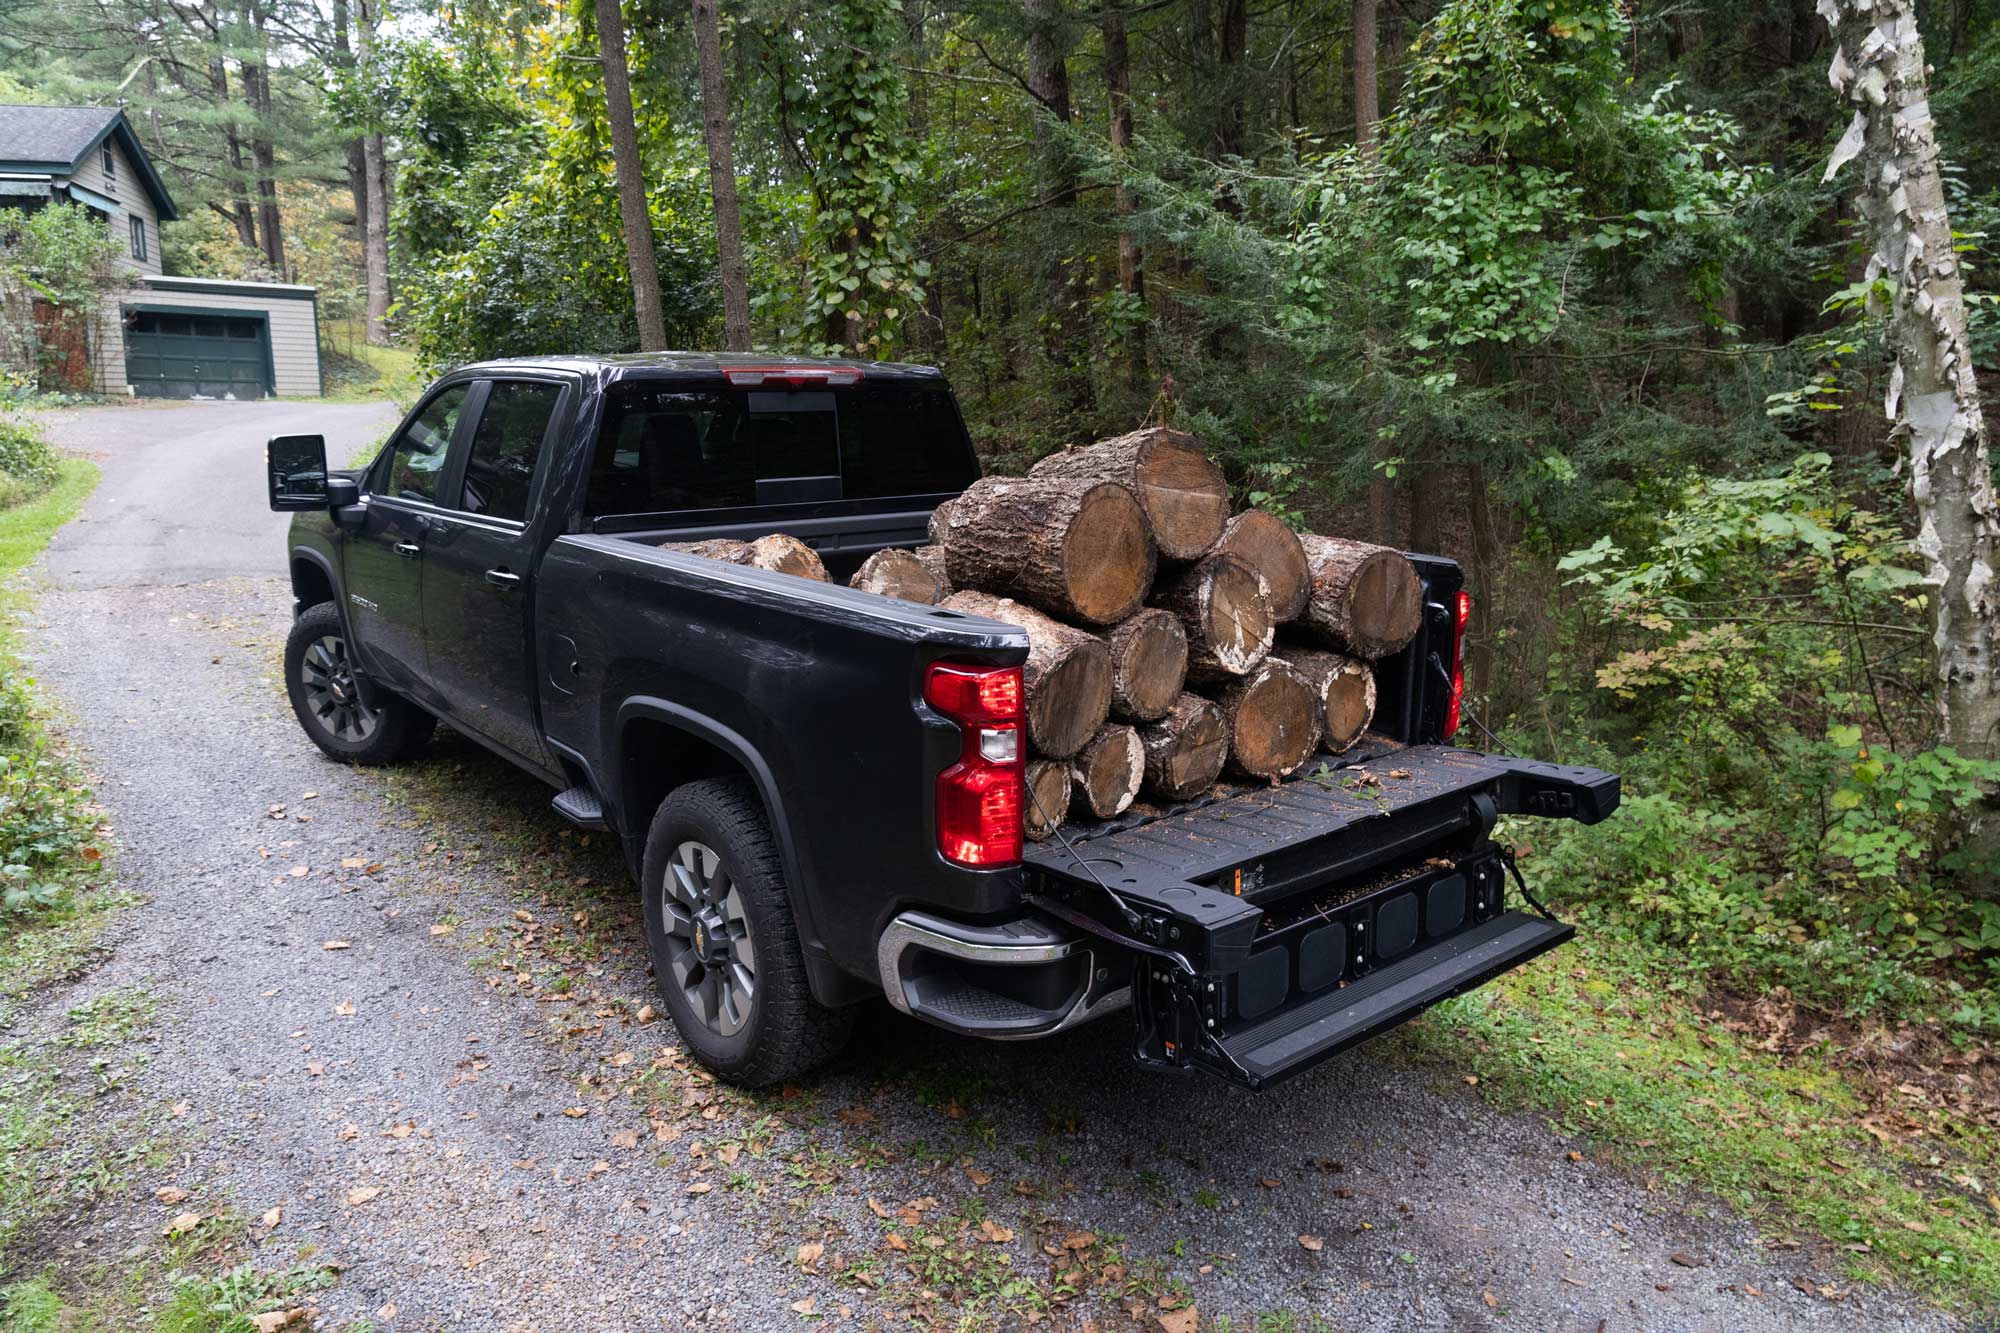 2024 Silverado 2500 HD with bed full of logs and tailgate folder down as a step.